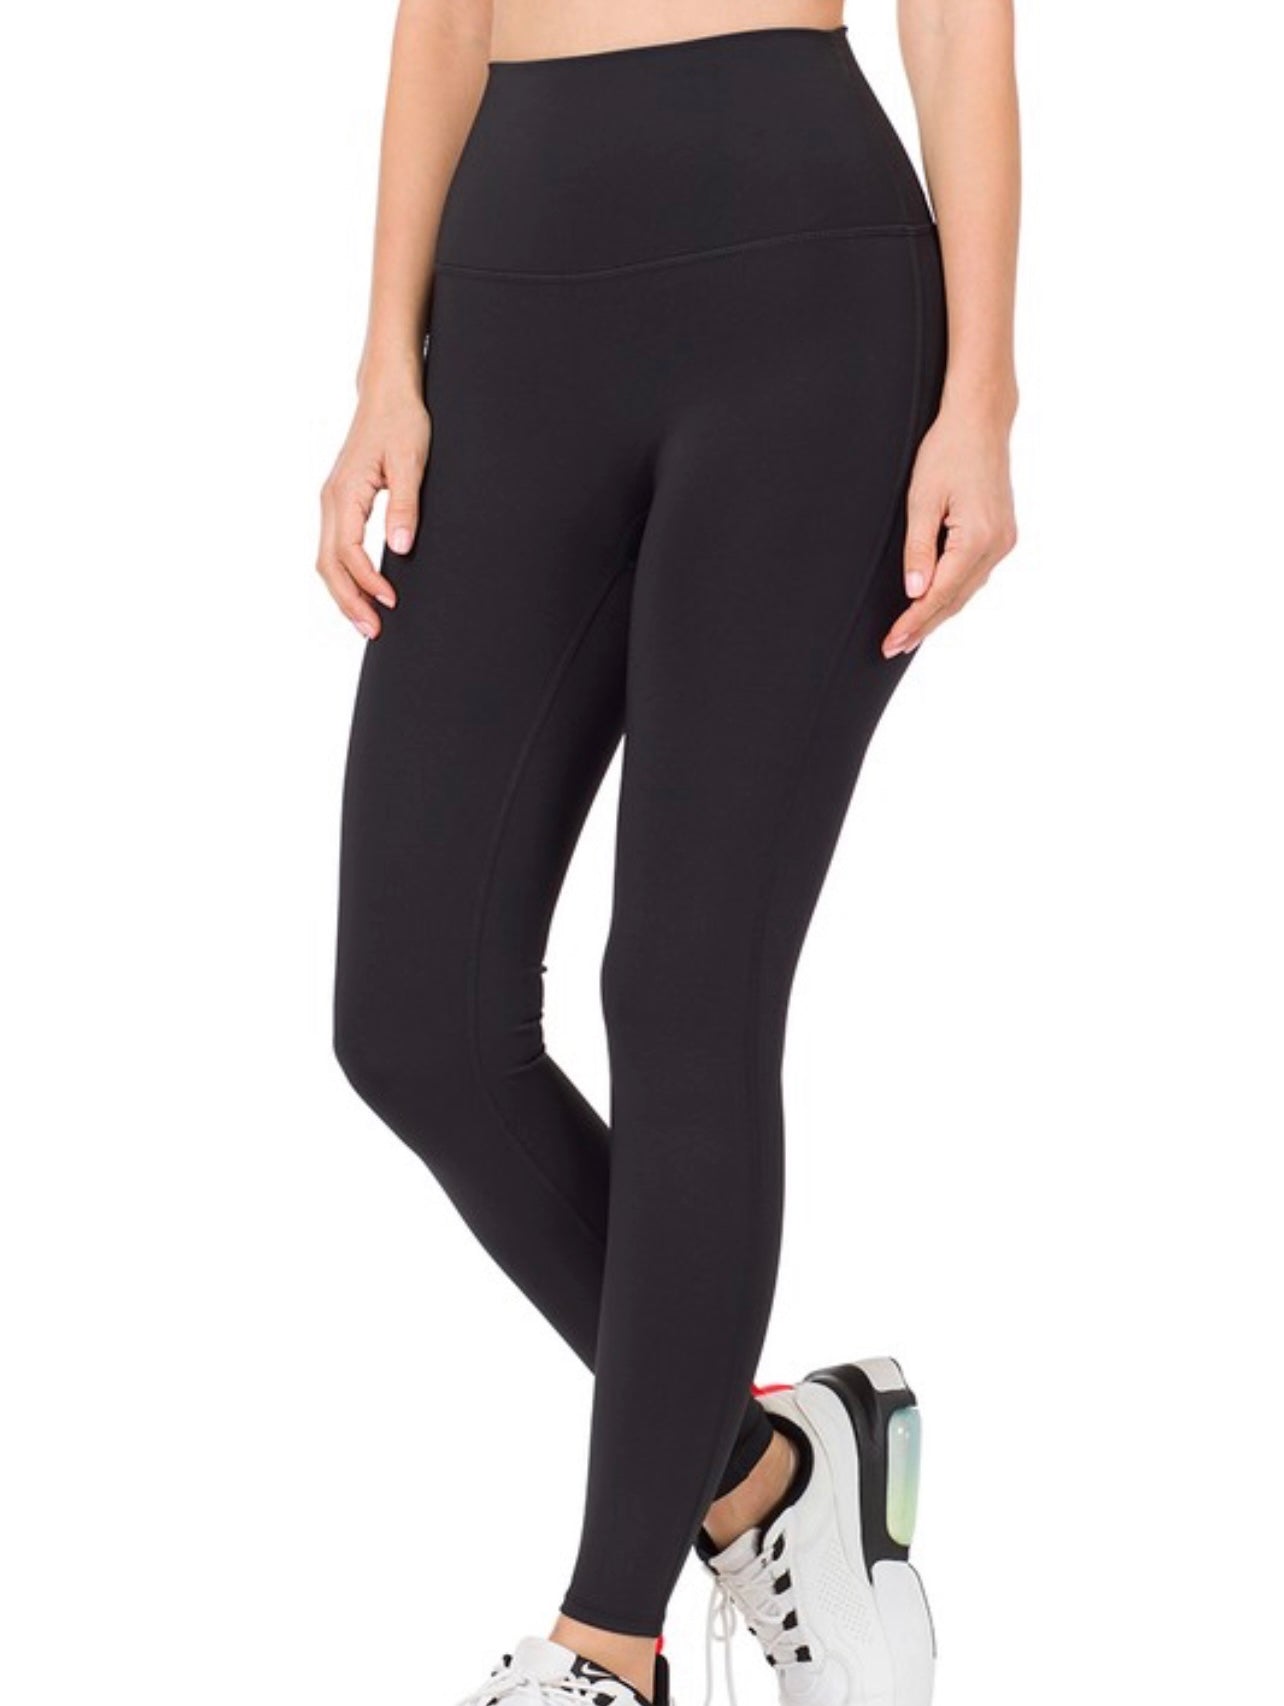 Wild Fable Women's High Waisted Leggings Black Size XS (Lot of 5) BNWT